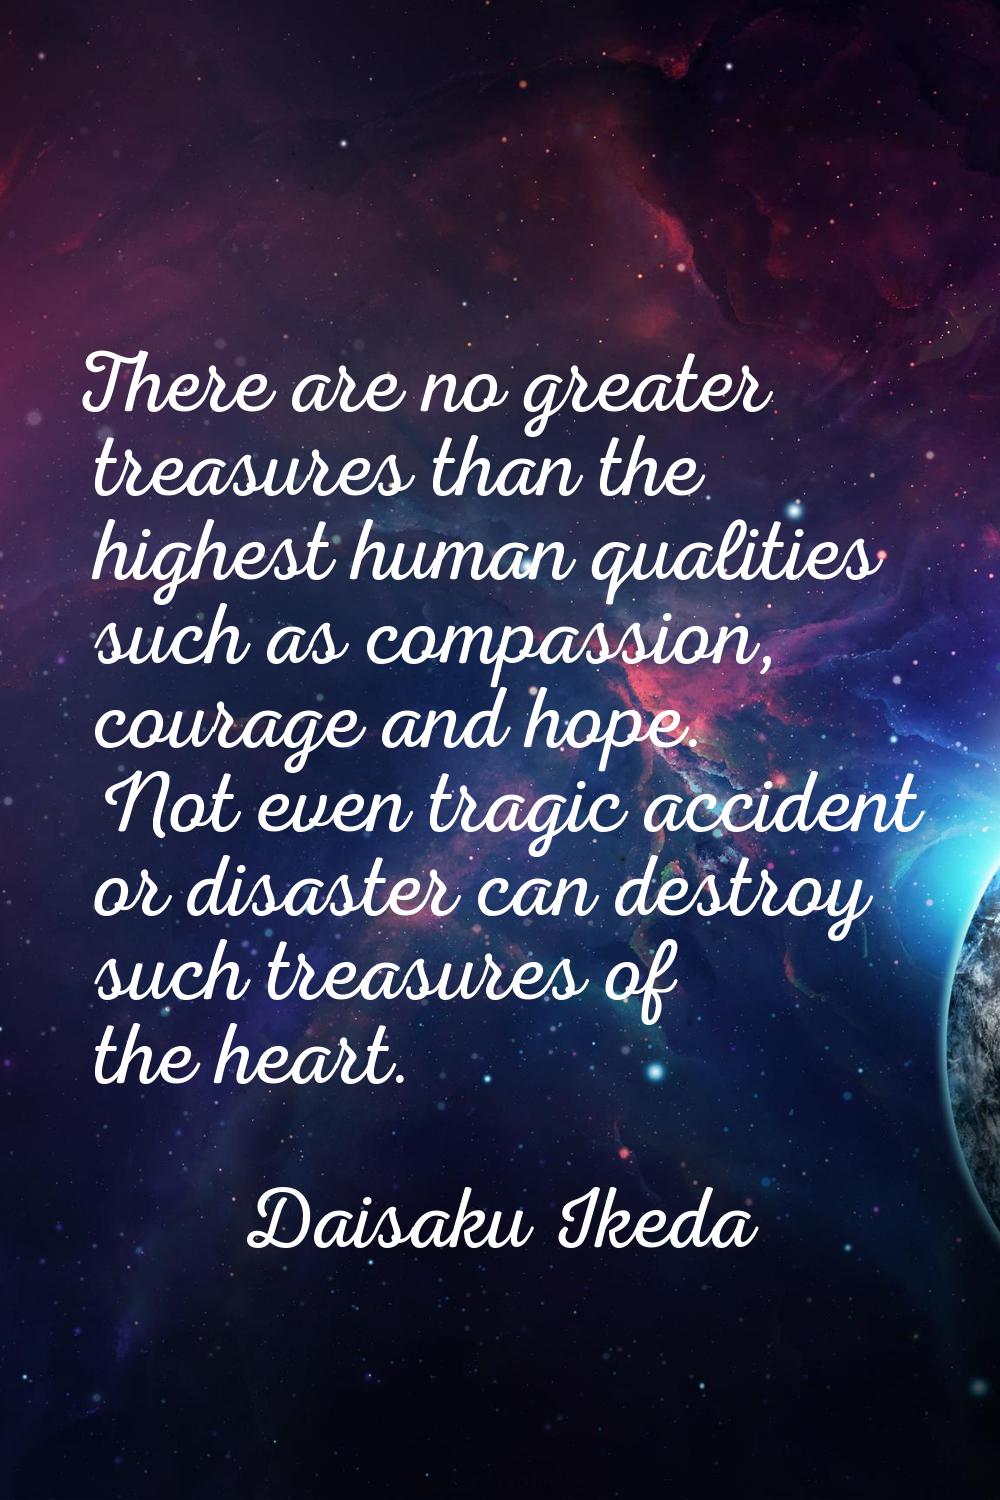 There are no greater treasures than the highest human qualities such as compassion, courage and hop